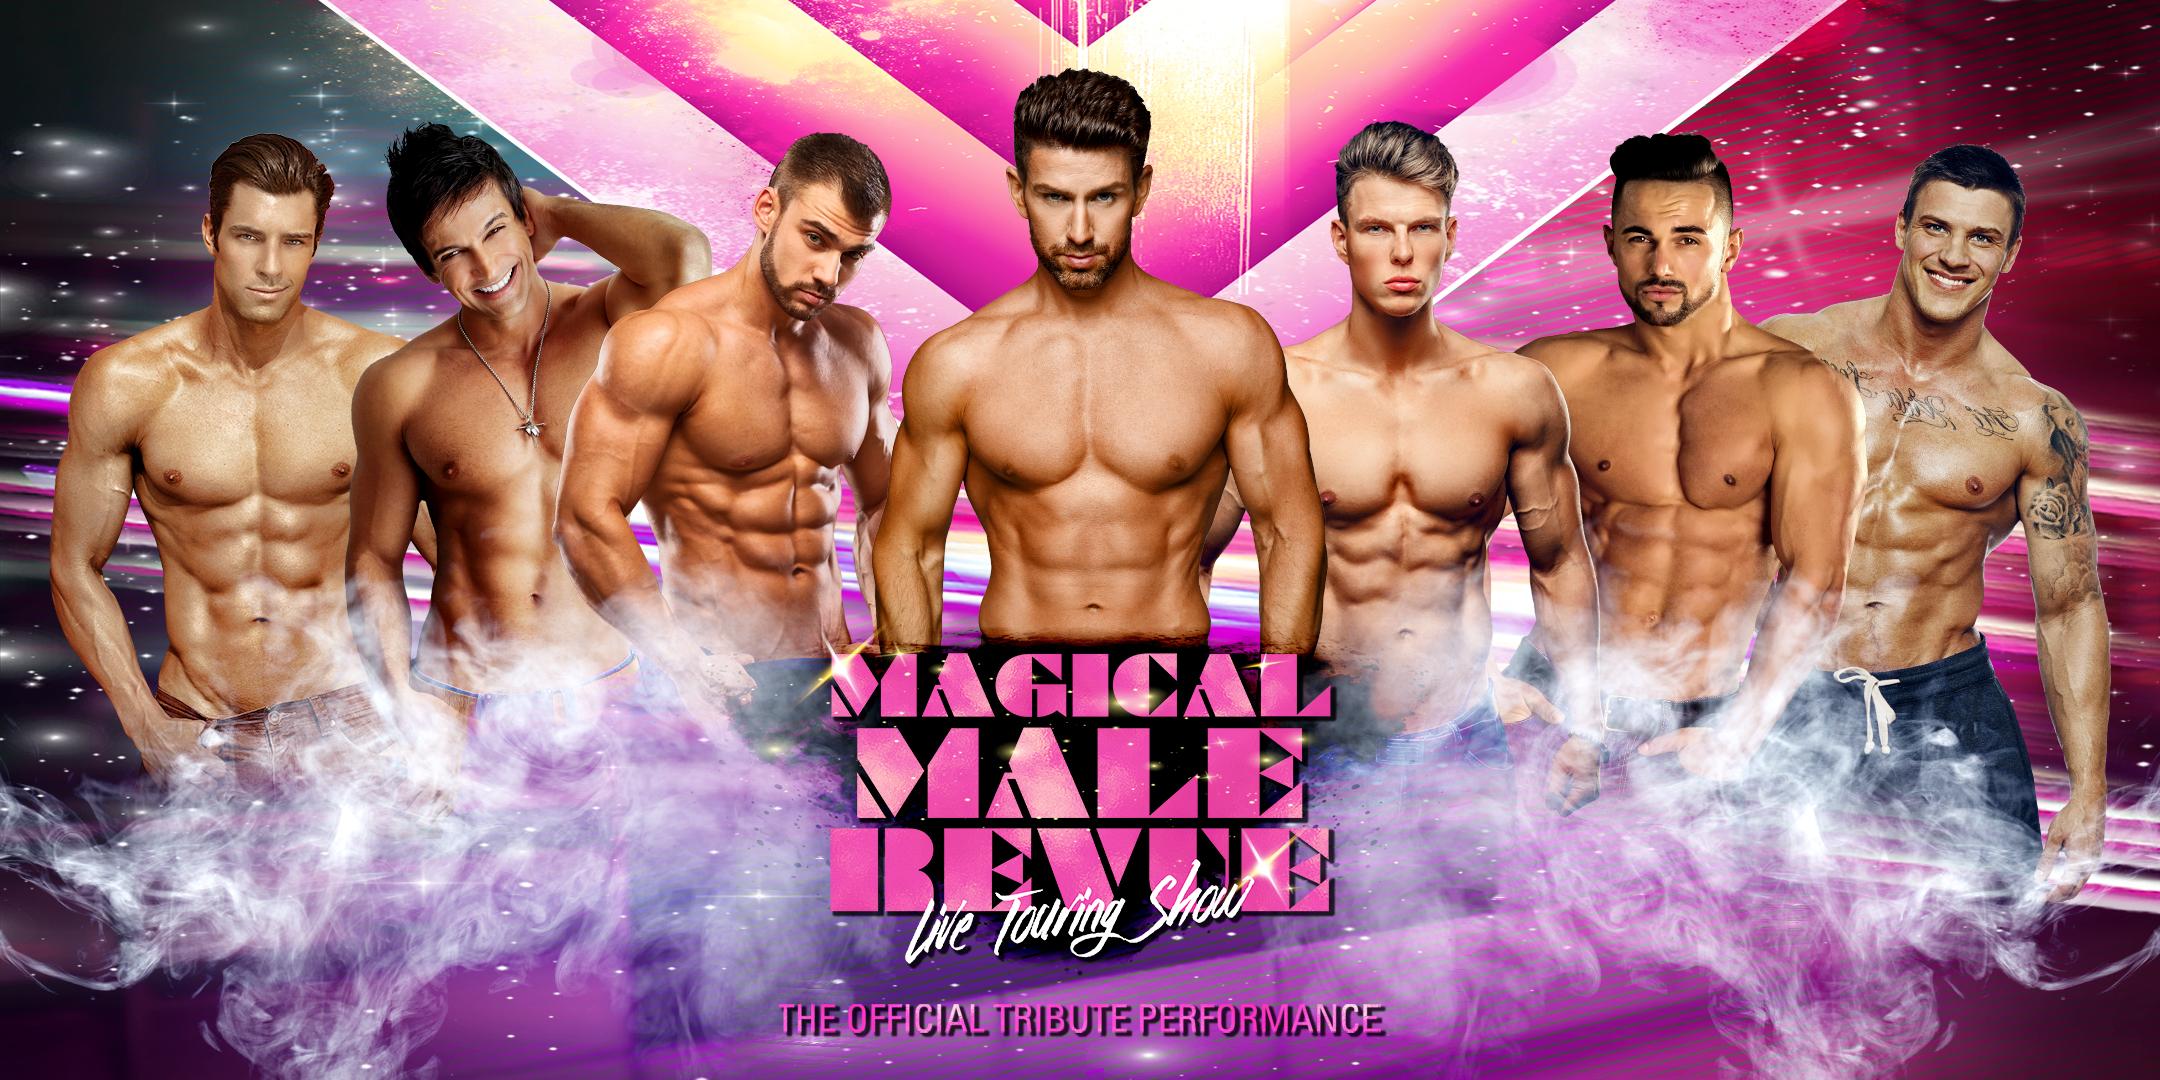 Discounted Magical Male Revue Tickets at Strokers Dallas!